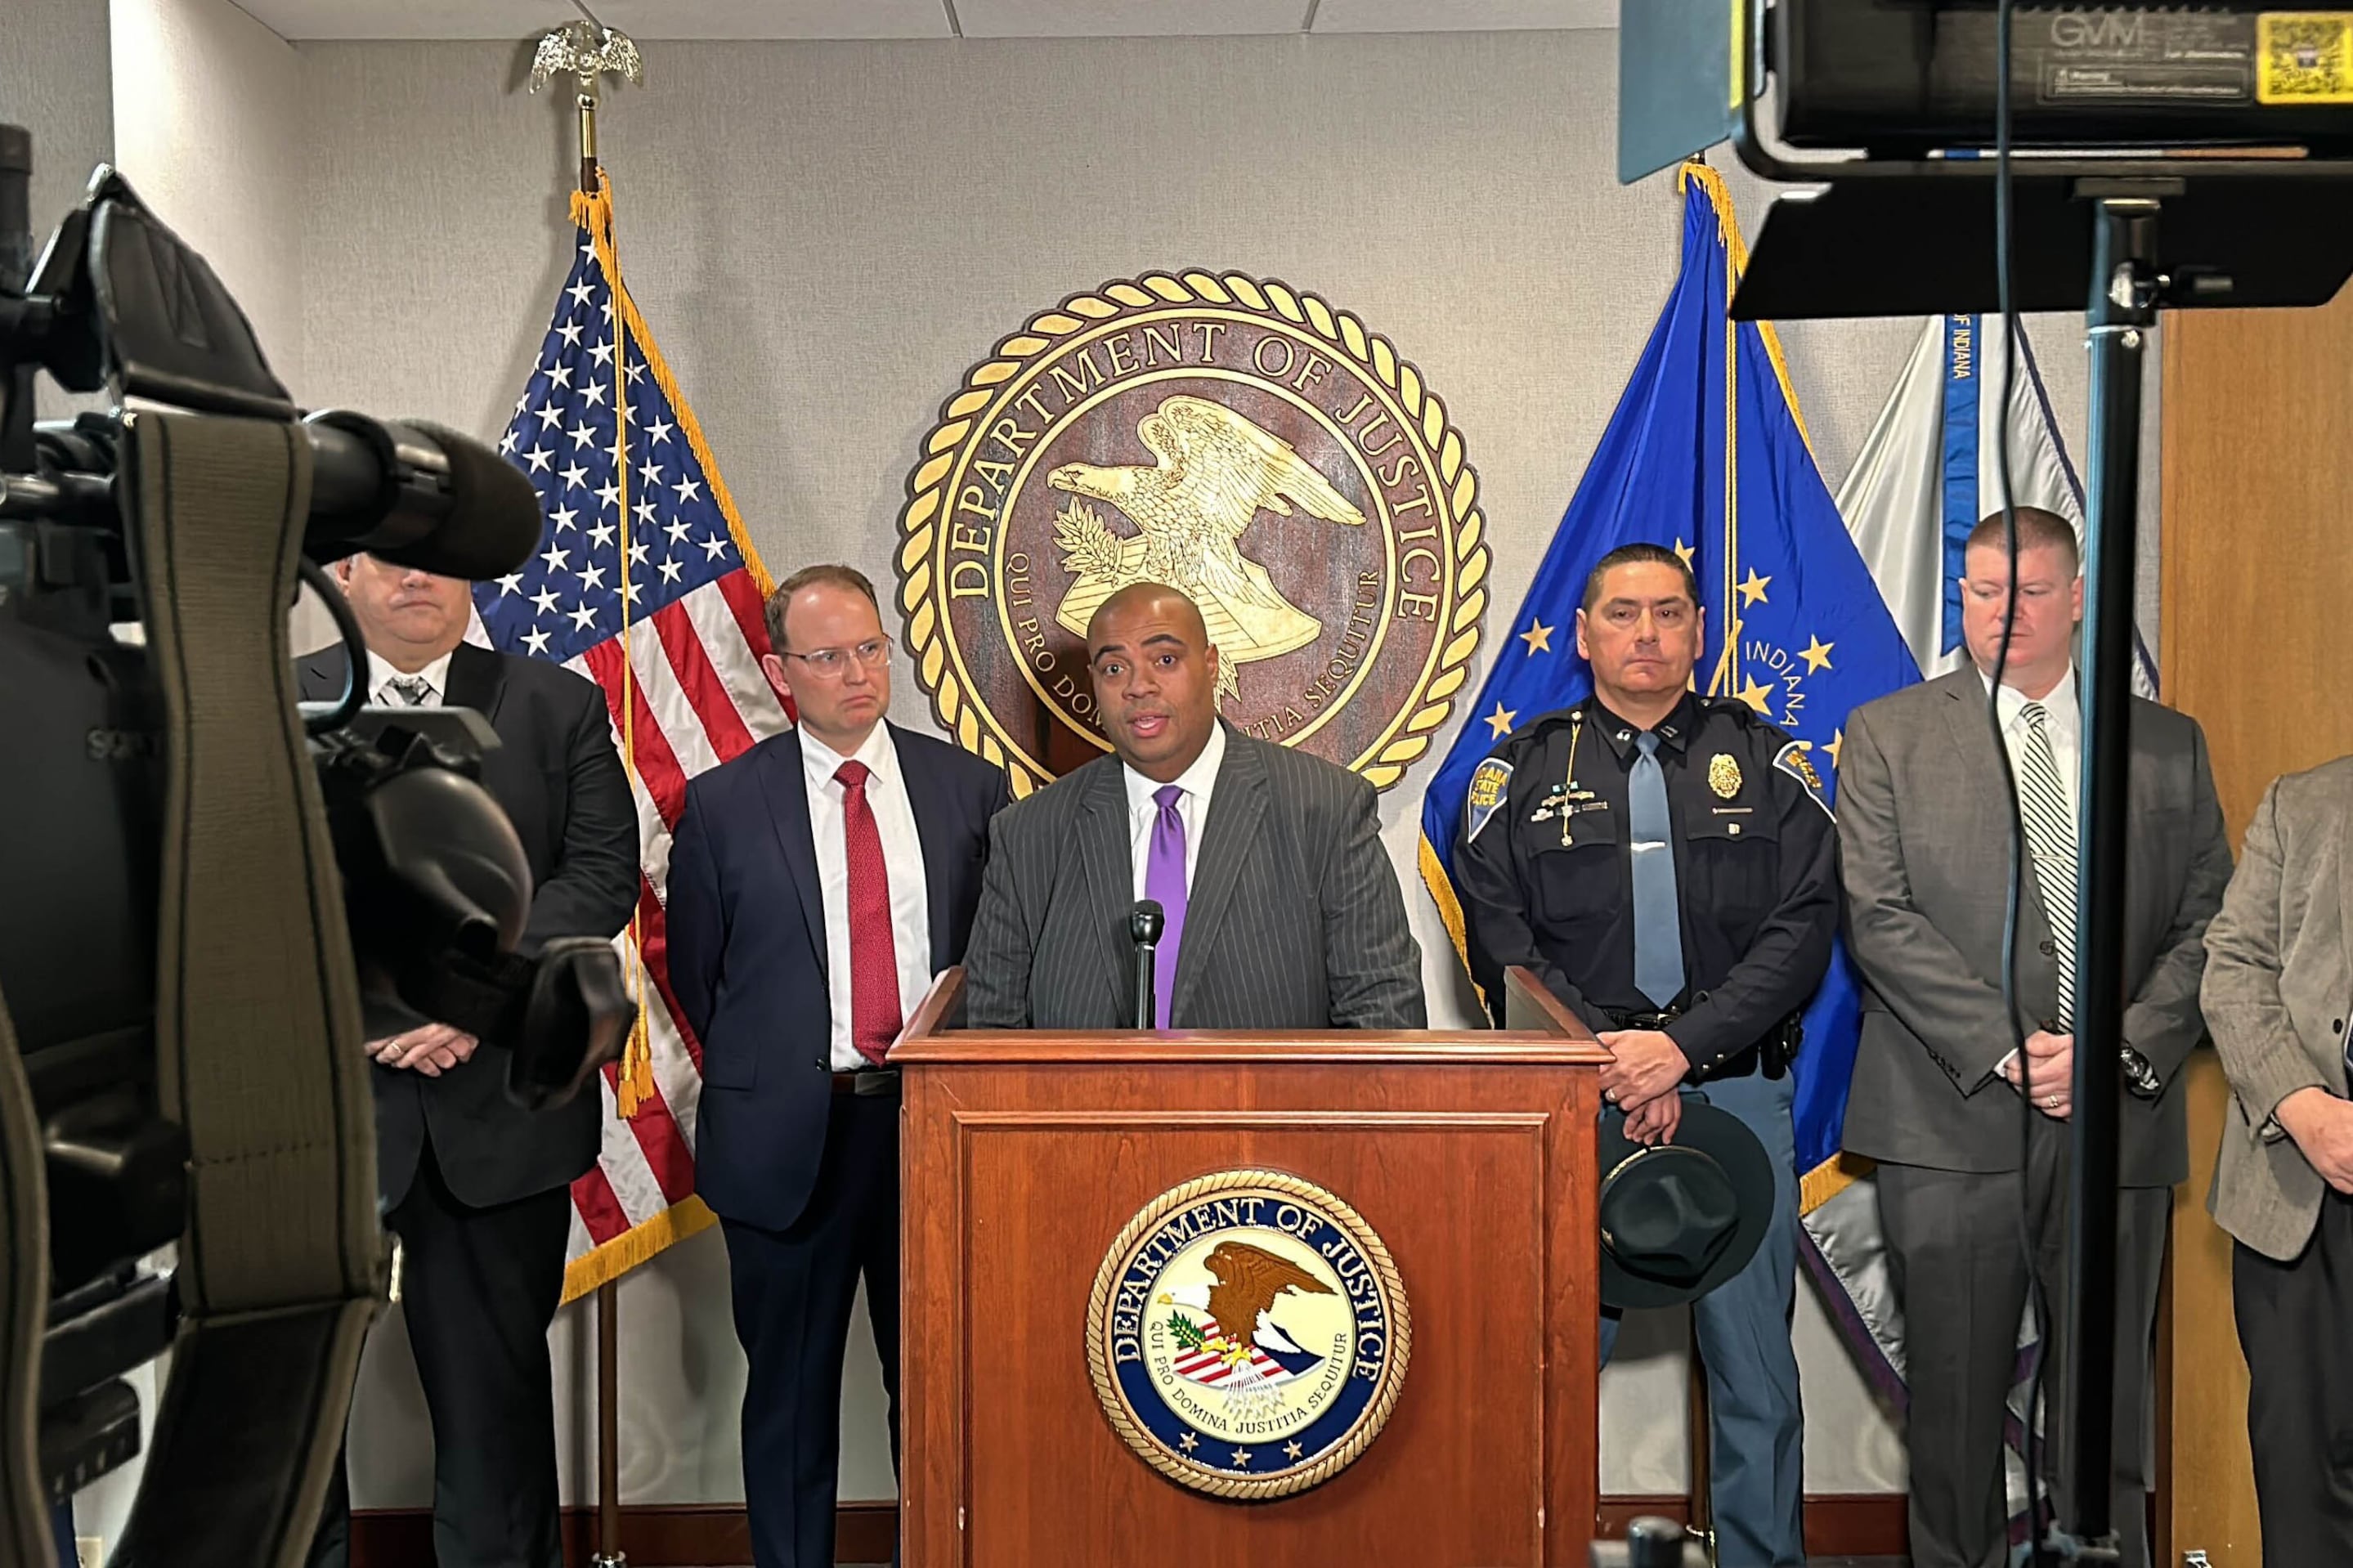 Six men wearing suits stand in a row while the person in the middle stands behind and speaks from a podium. There are two flags and a giant seal in the background and camera gear in the foreground.